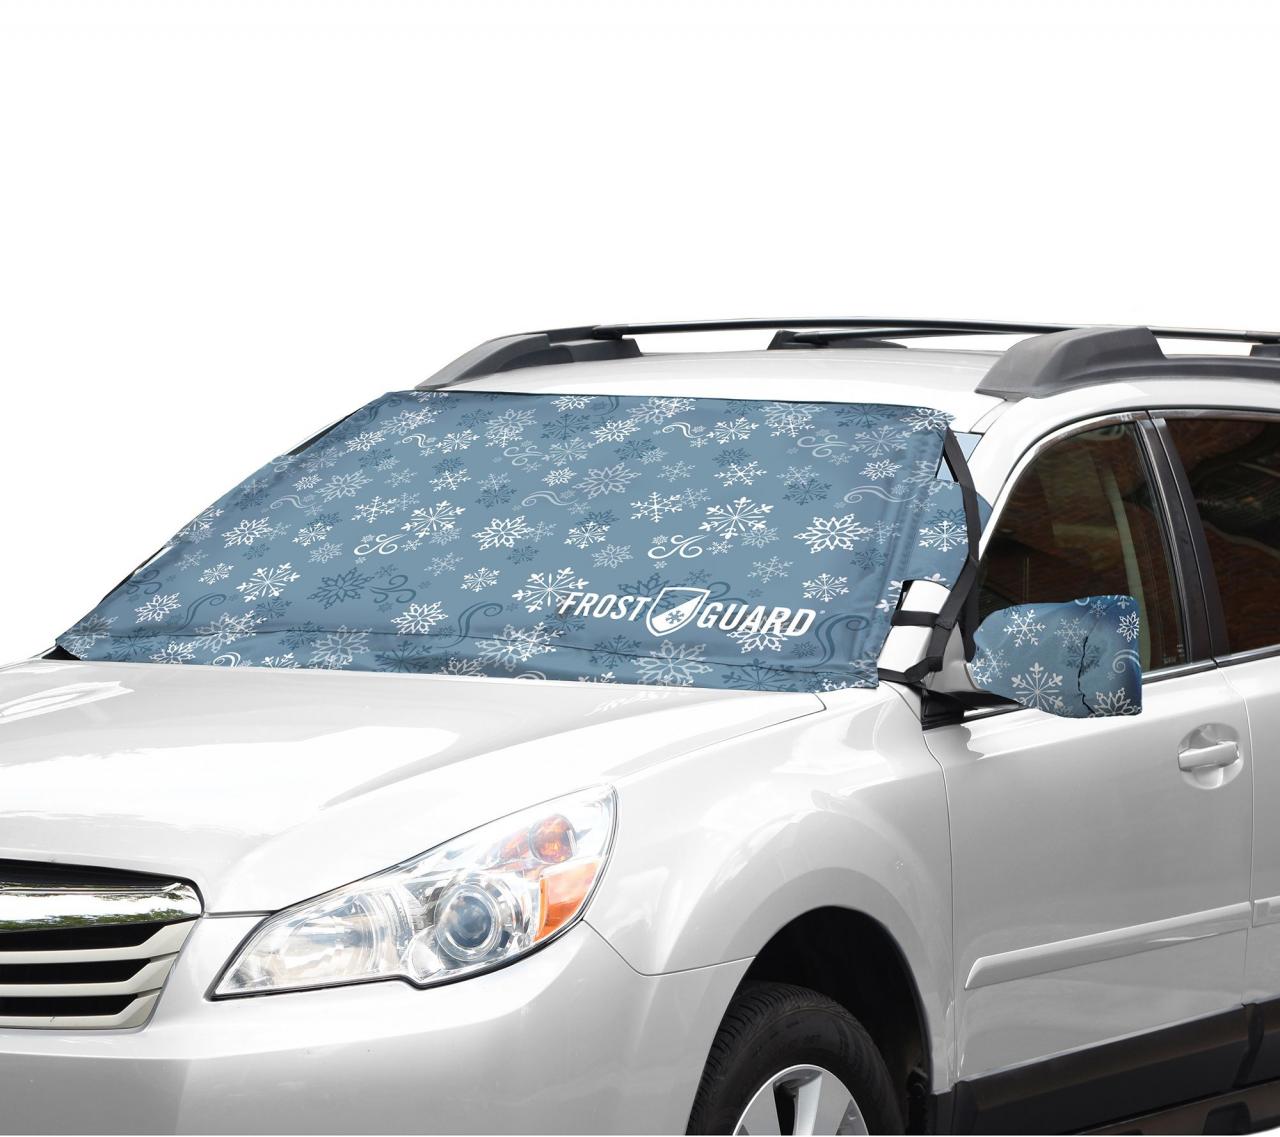 Delk Products, Inc. Delk Frost Guard with Windshield Cover XL 52496 (Black)  : Amazon.co.uk: Automotive